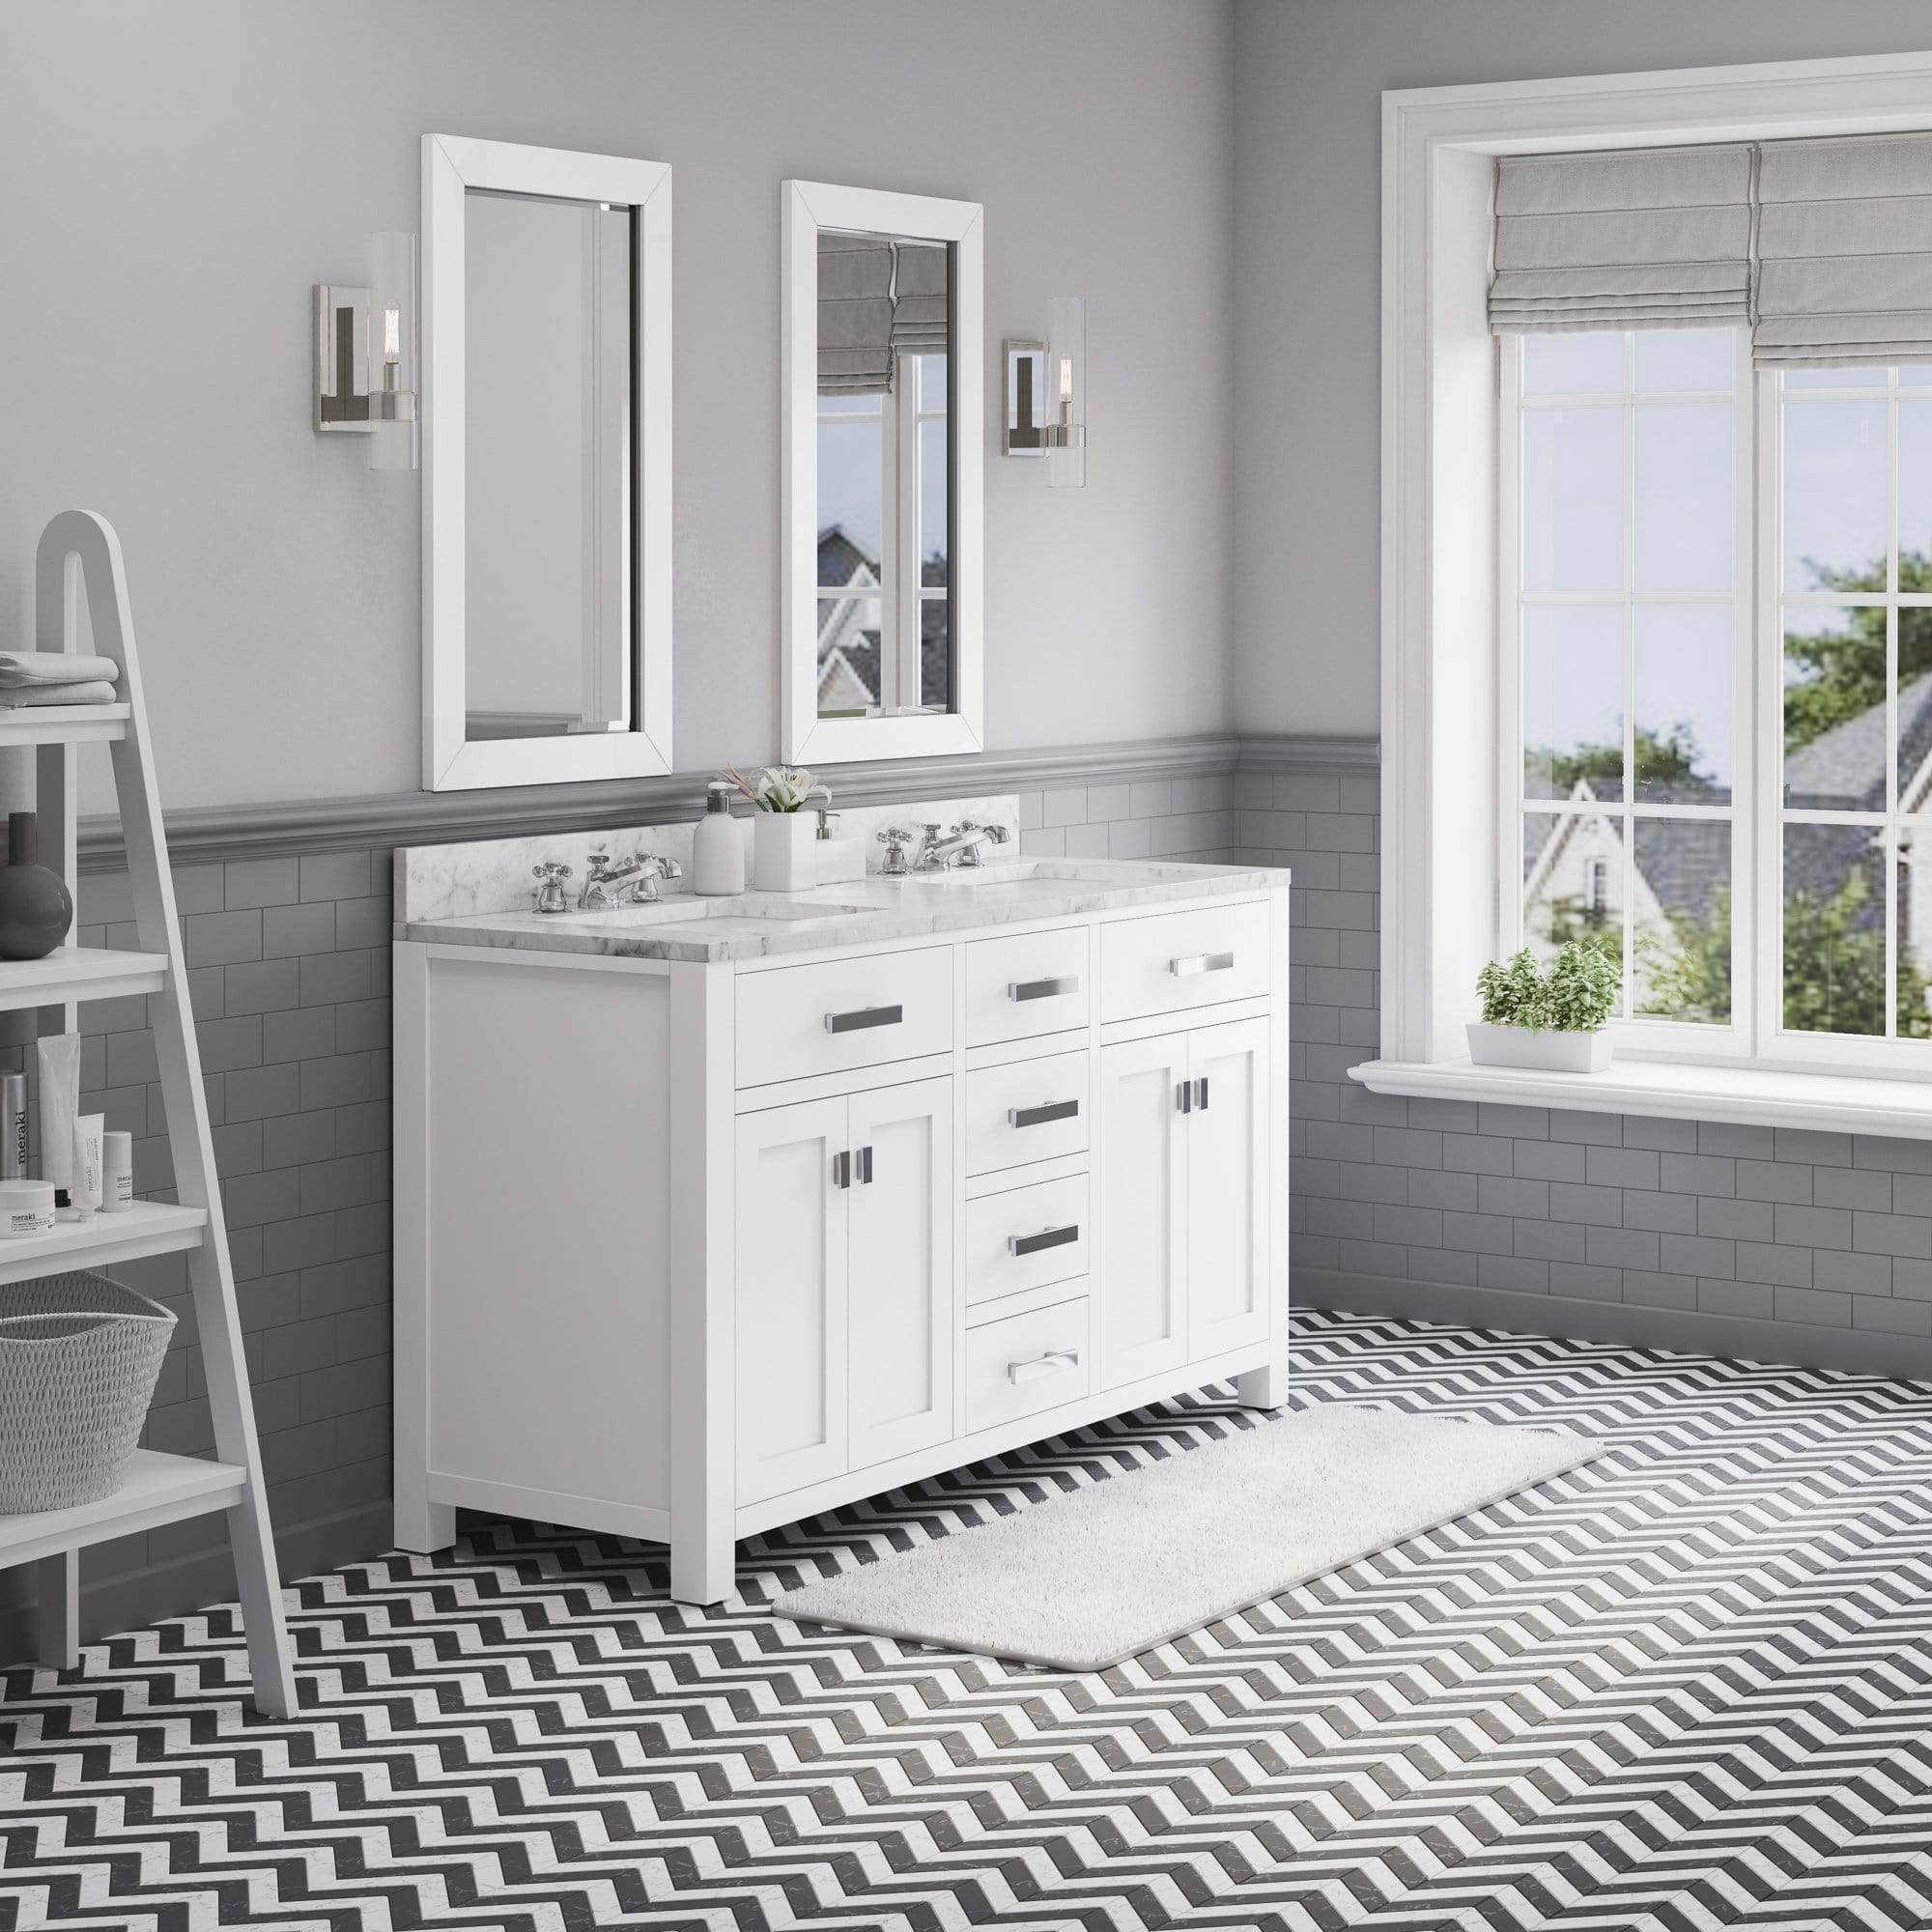 Water Creation 60 Inch Pure White Double Sink Bathroom Vanity With 2 Matching Framed Mirrors And Faucets From The Madison Collection - Molaix700621683810Bathroom vanityMS60CW01PW-R21BX0901